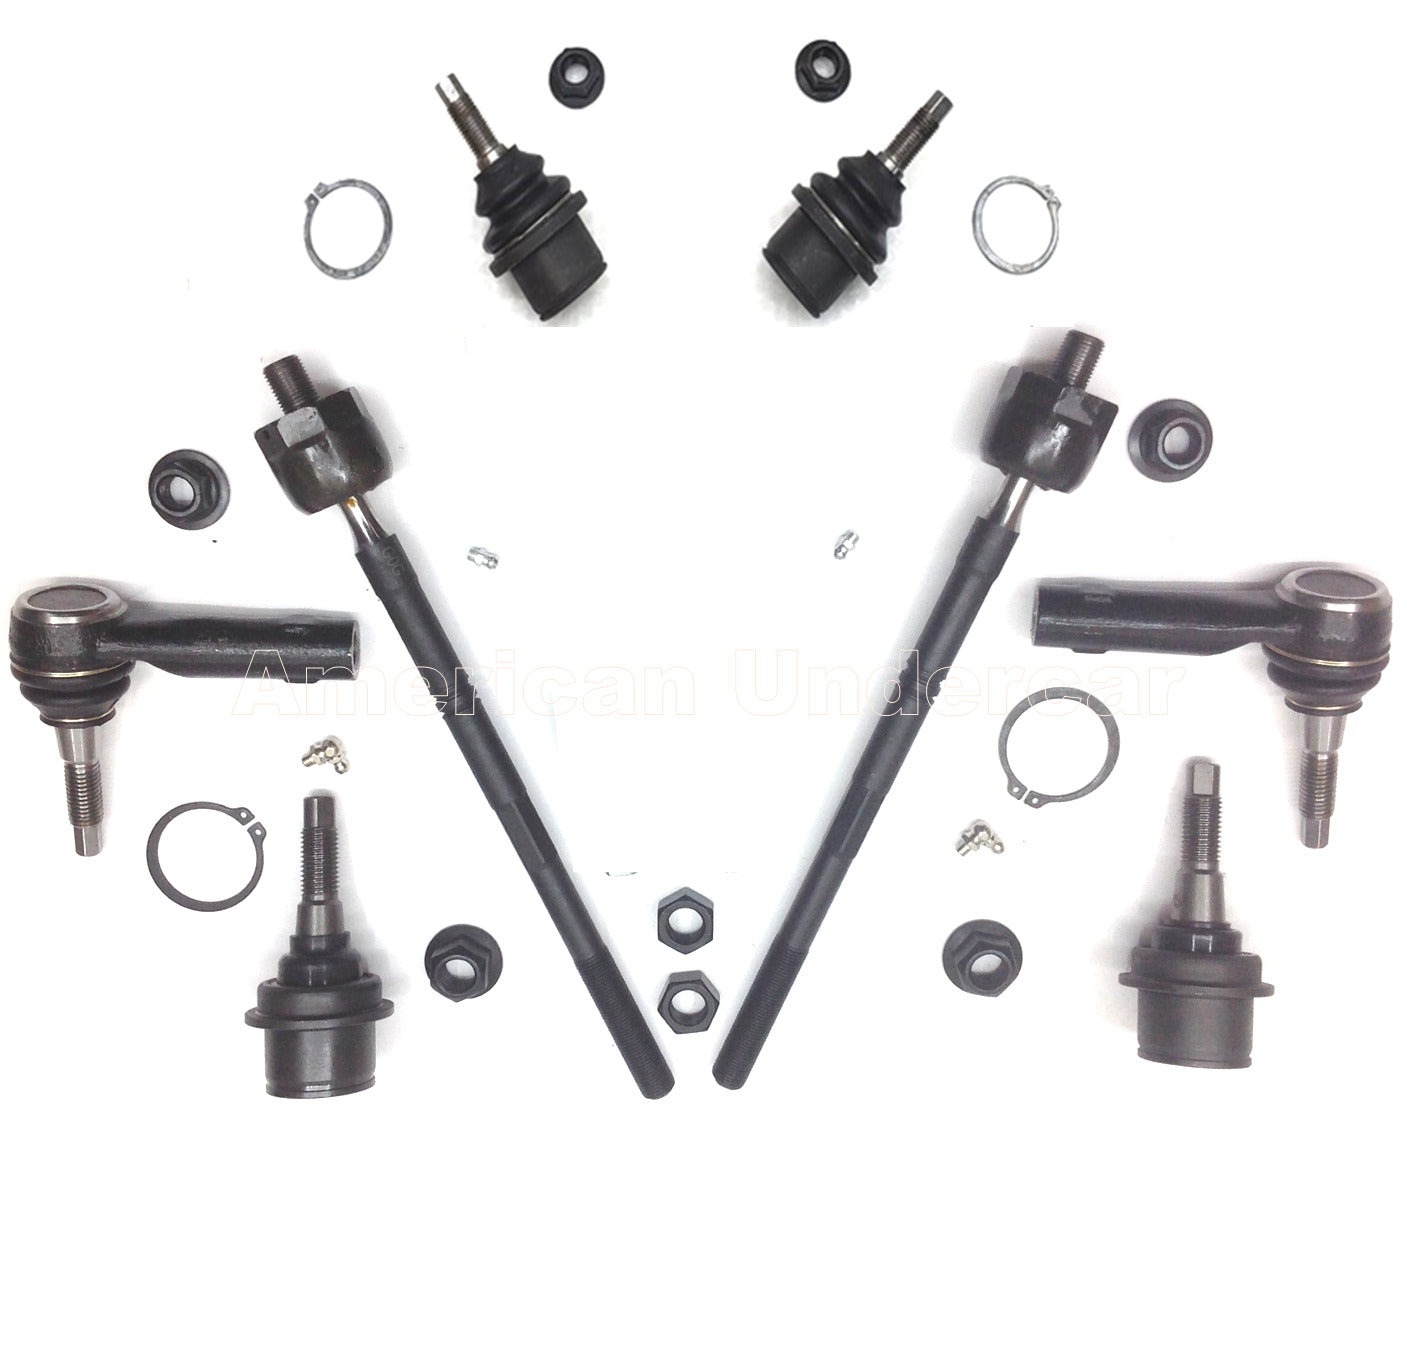 HD Ball Joints Tie Rod Steering Suspension Kit for 2018-2021 Ford Expedition 2WD